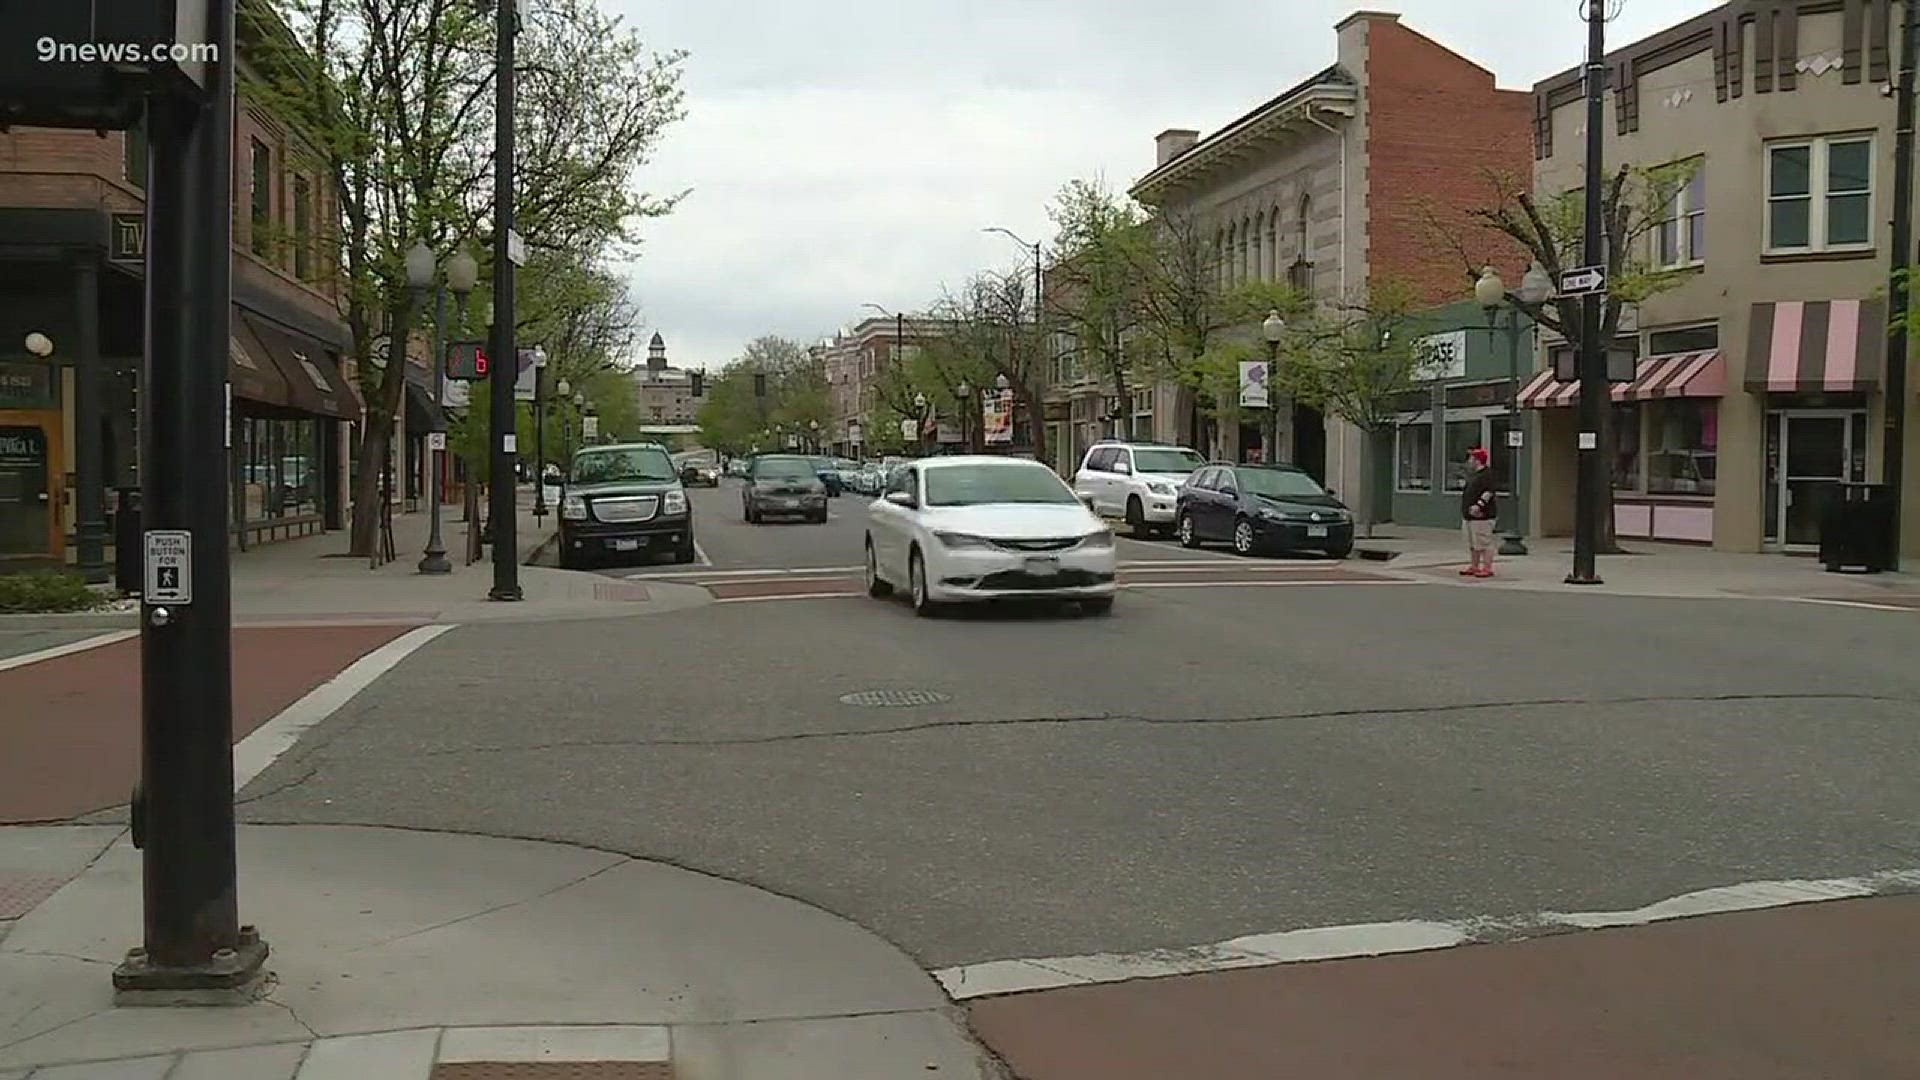 Littleton's annual Main Street Block Party was canceled this year, according to the City of Littleton. Its organizer said it was because of permit fees they have never had to pay in the past.